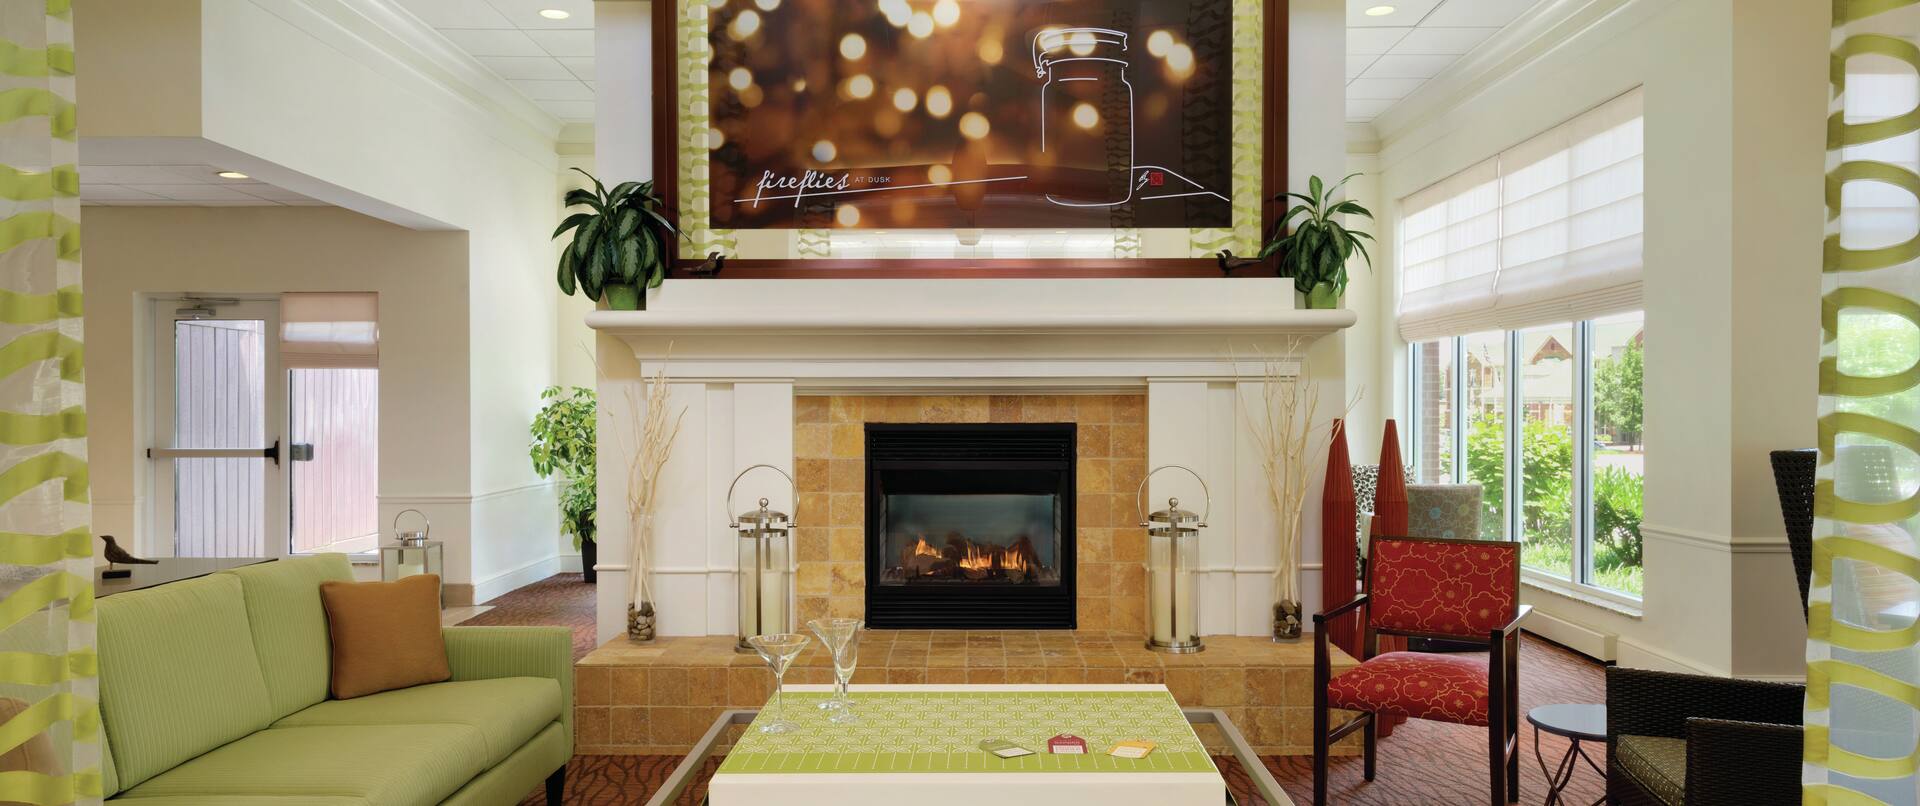 Art Feature Above Fireplace With Lounge Seating in Lobby